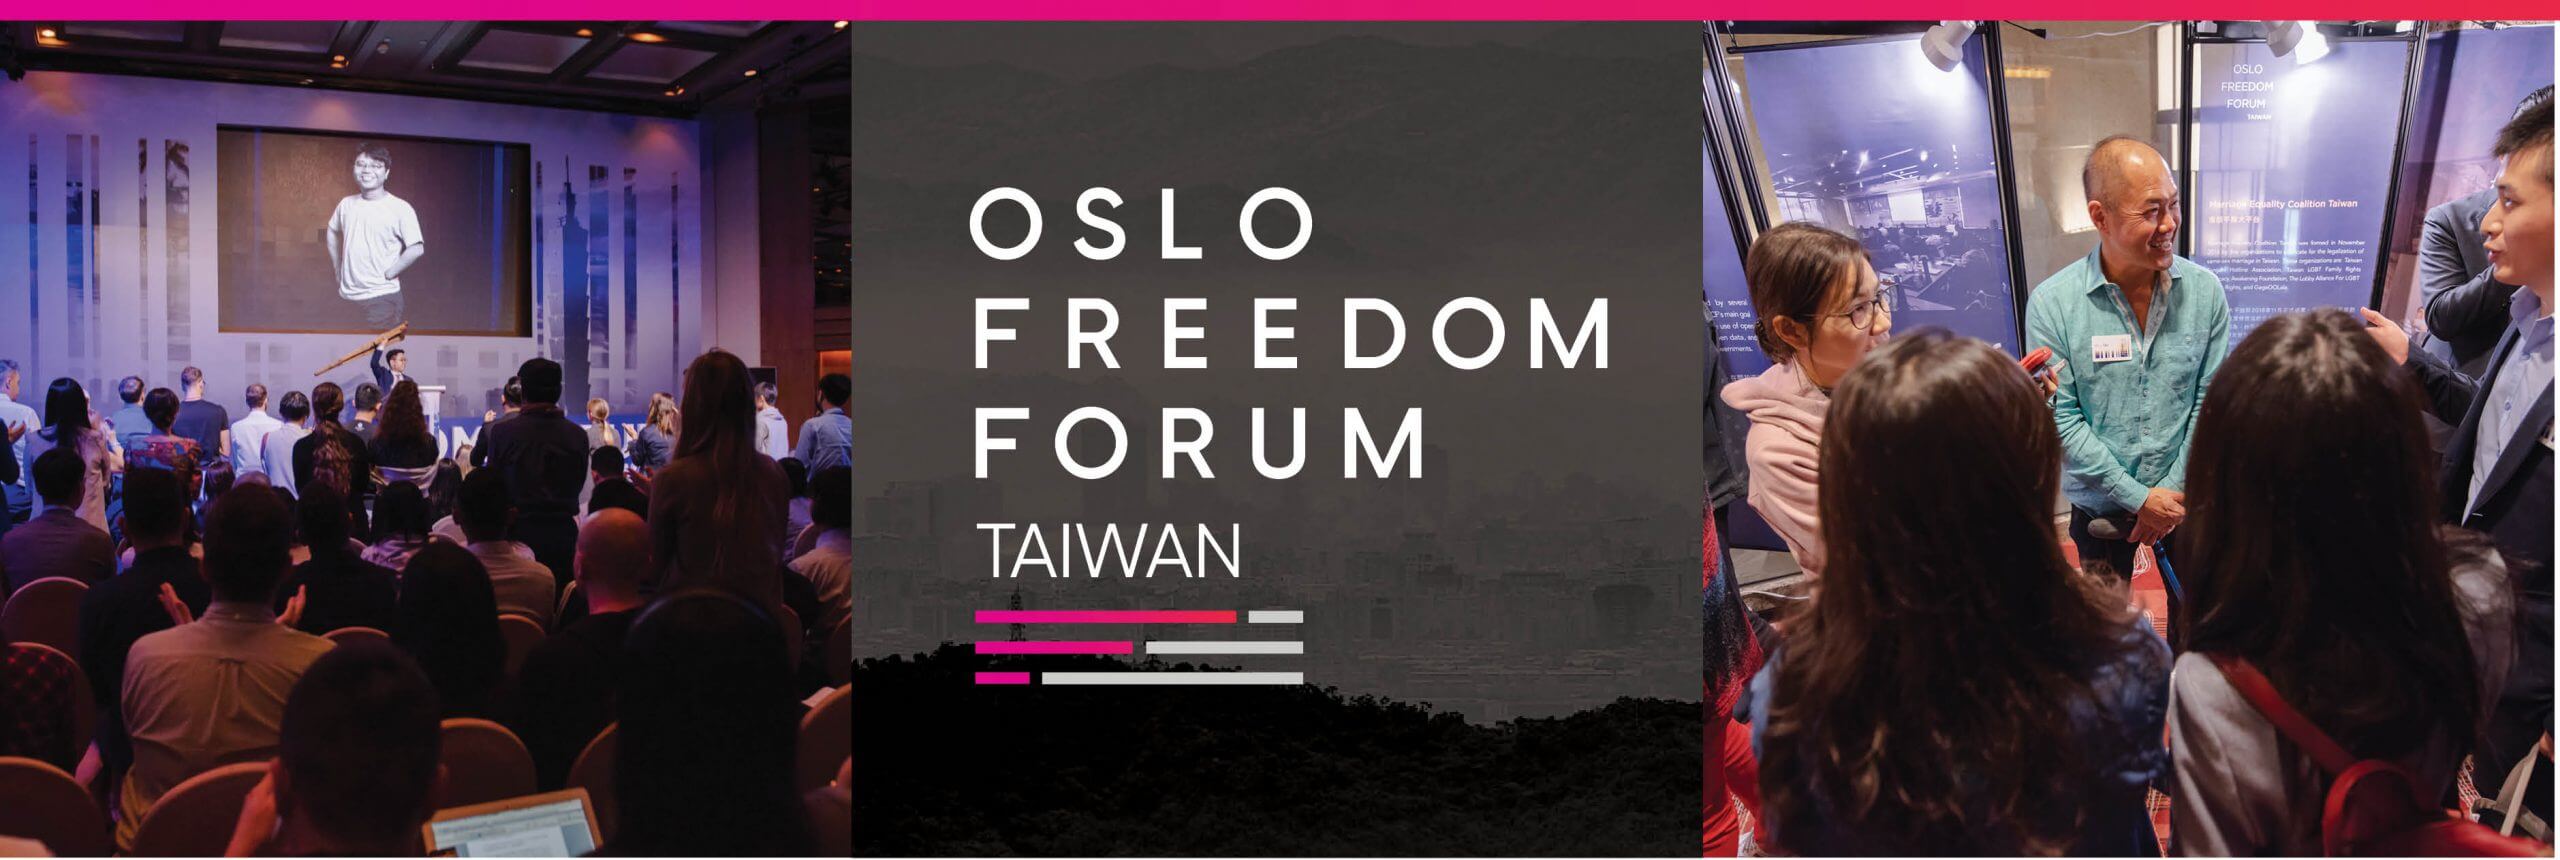 Announcing the 2019 Oslo Freedom Forum in Taiwan